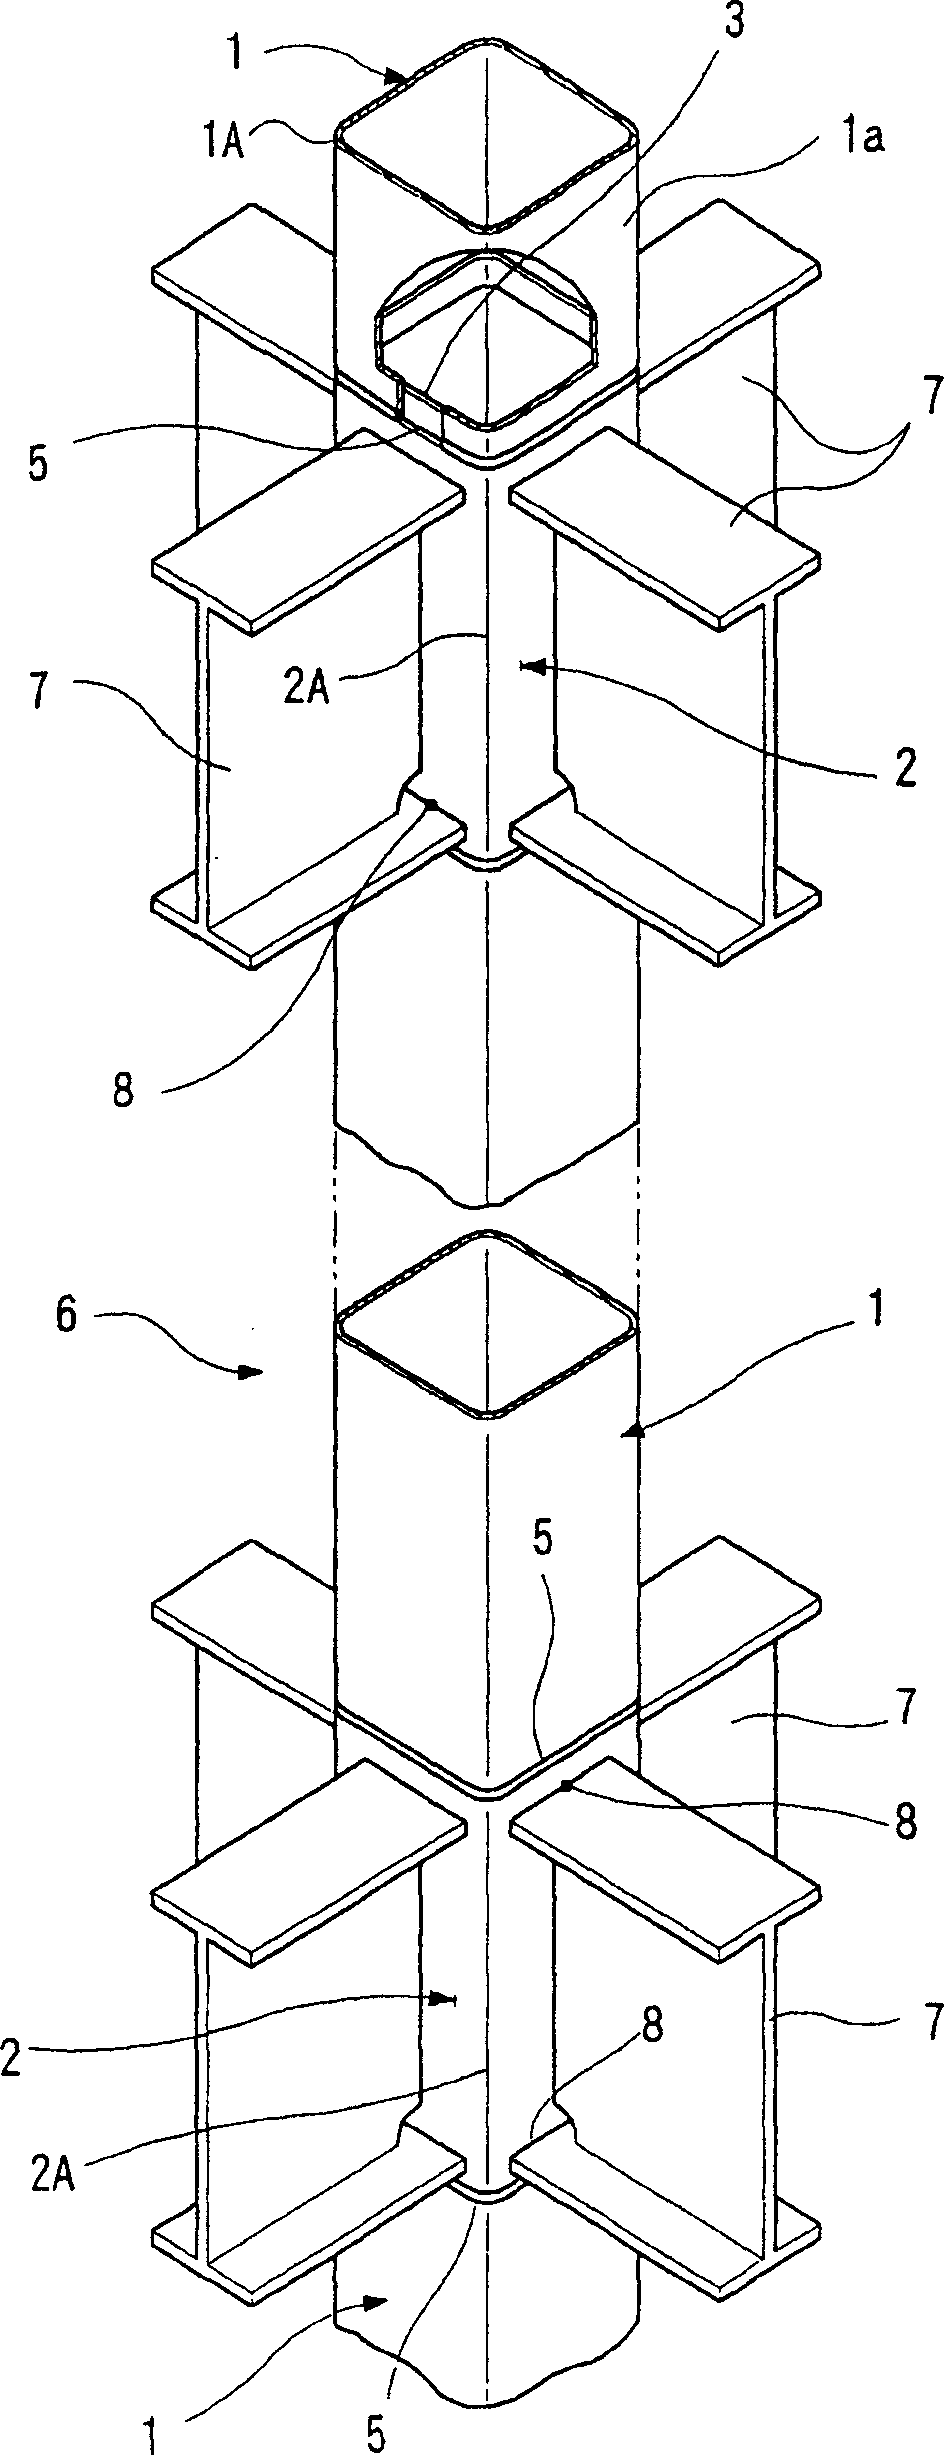 A welded joint construction for a steel pipe column